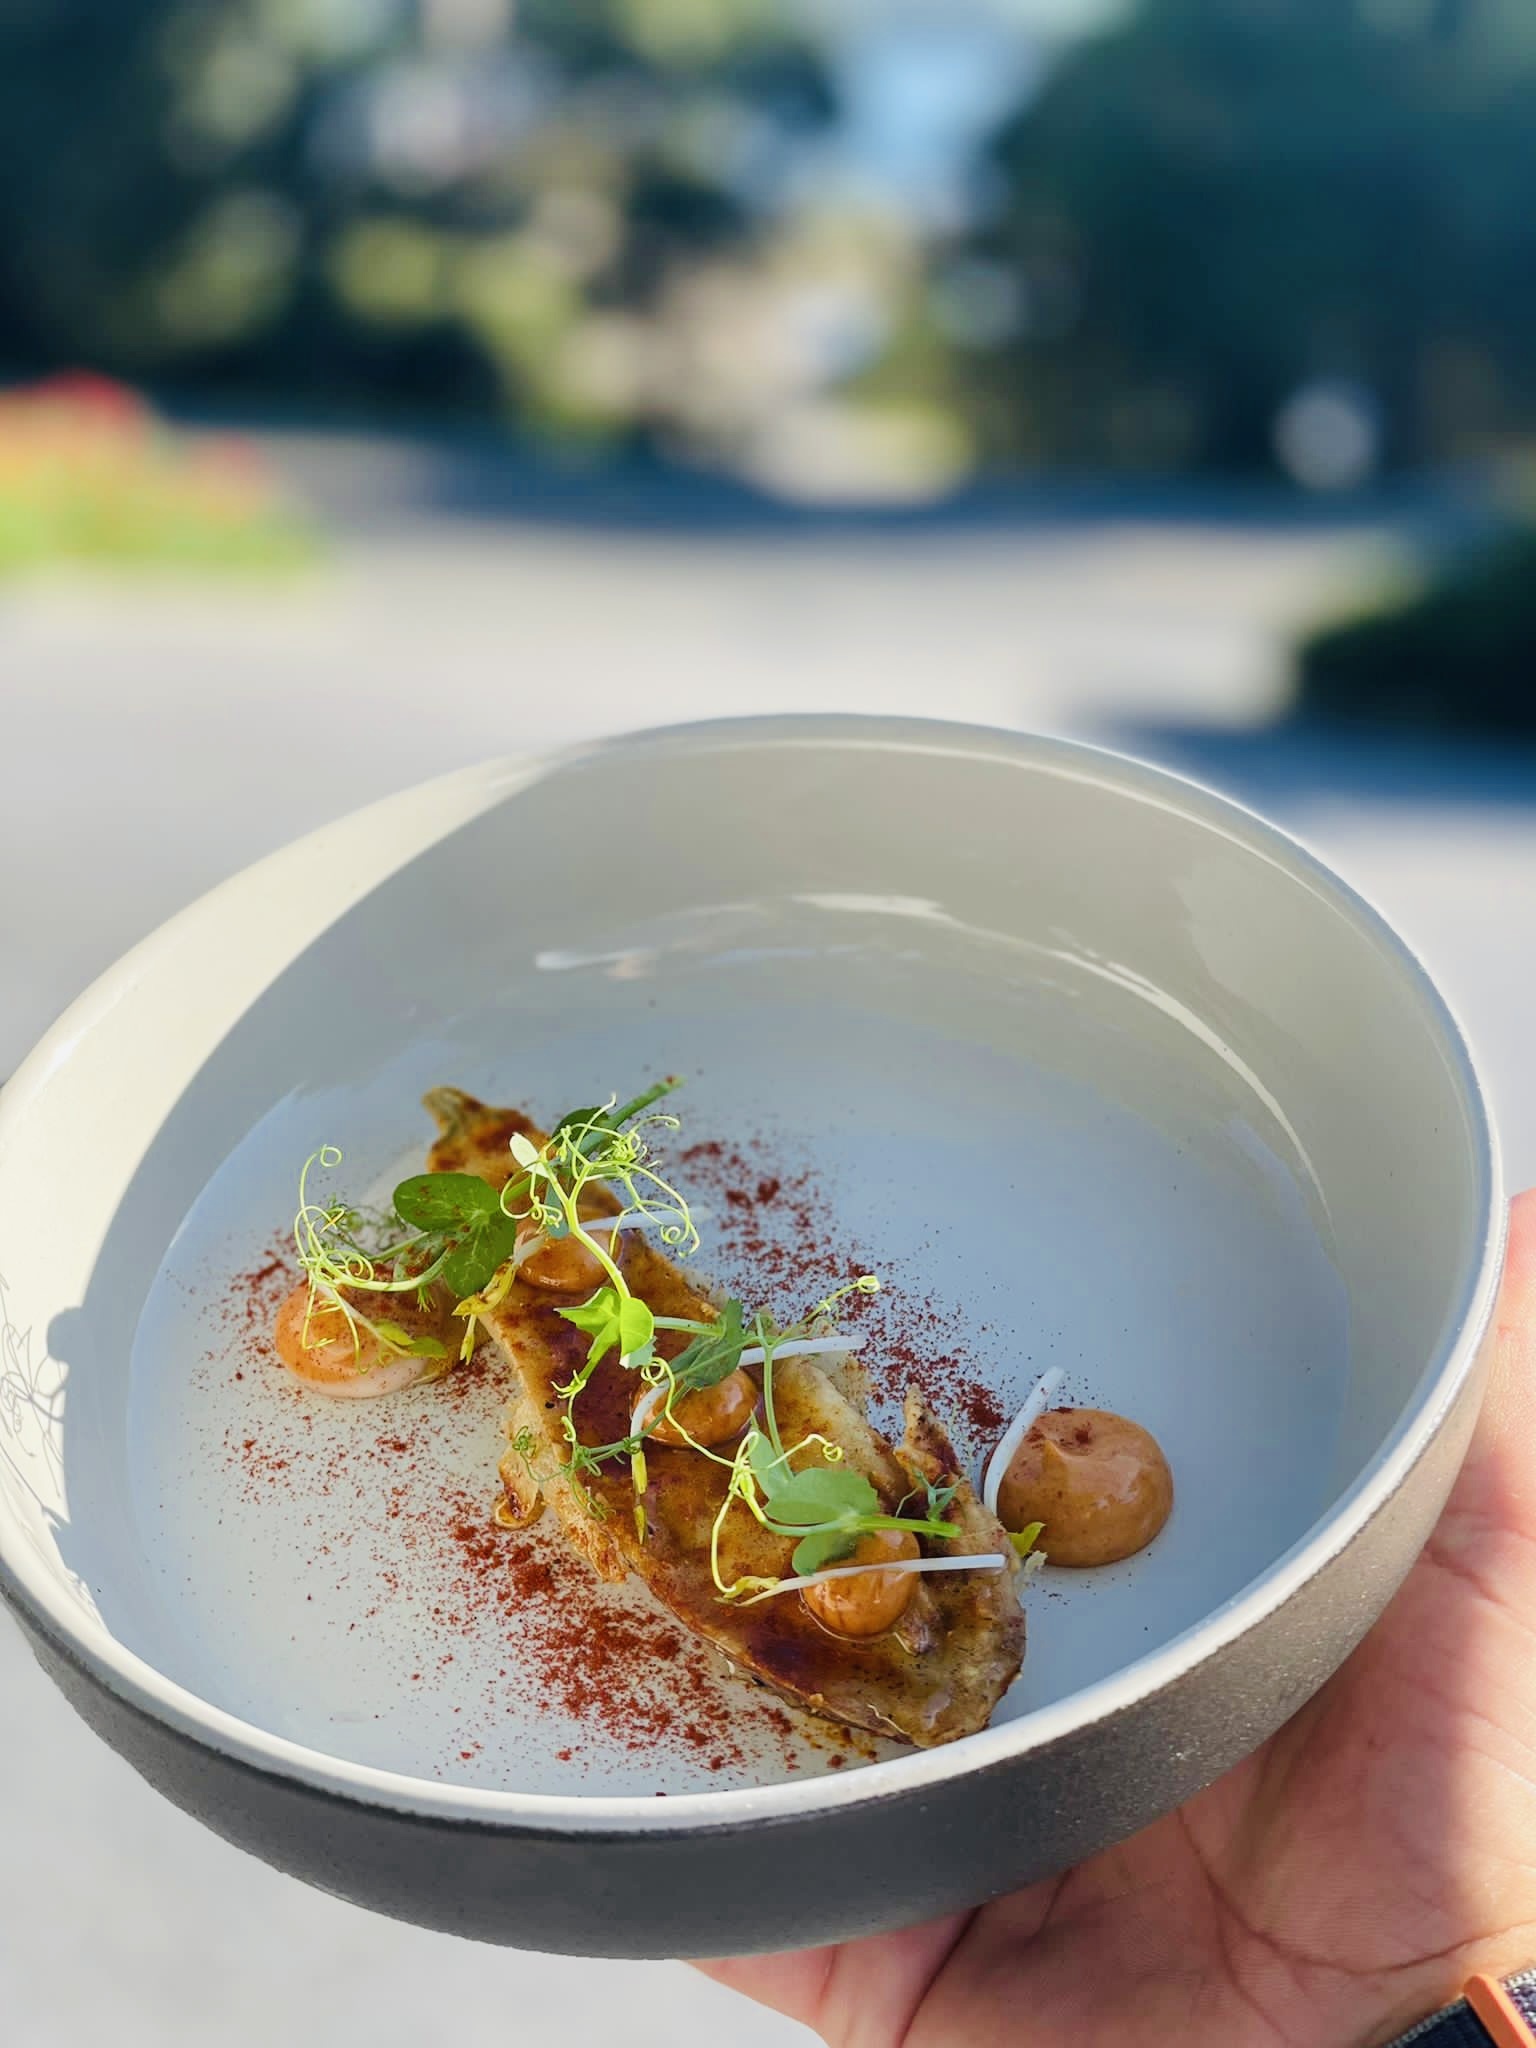 Crispy eggplant with honey, smoked paprika and citrus oil, as part of the R.AIRE dining experience at The Hampton Maid in Hampton Bays.